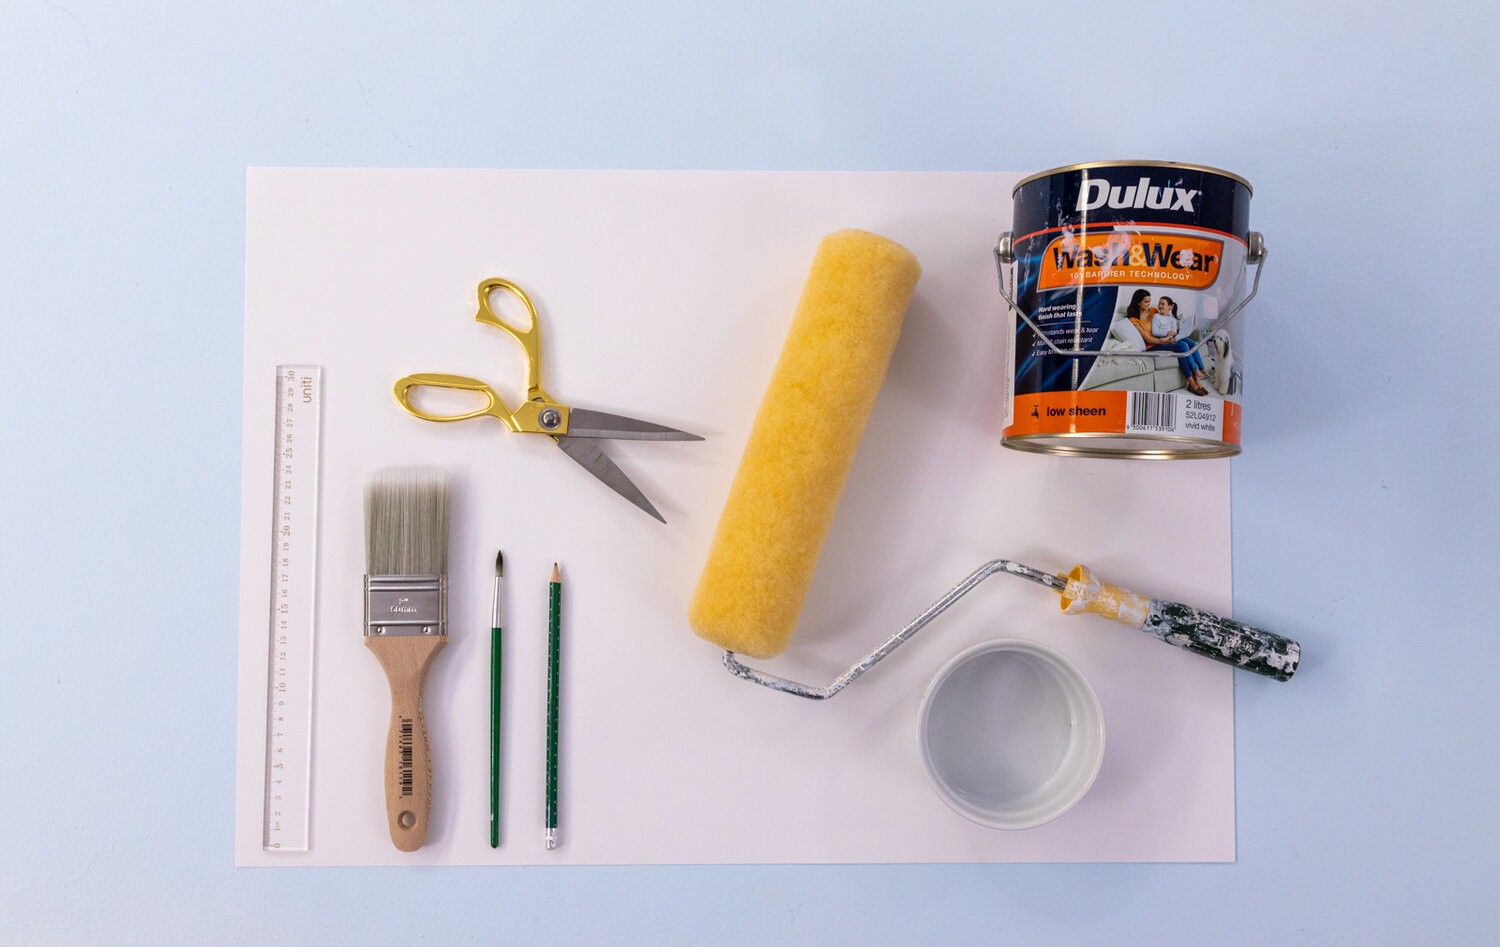 Supplies for the project lie on a table - a ruler, a large paintbrush, a small paintbrush, scissors, a roller, a ramekin, and paint.